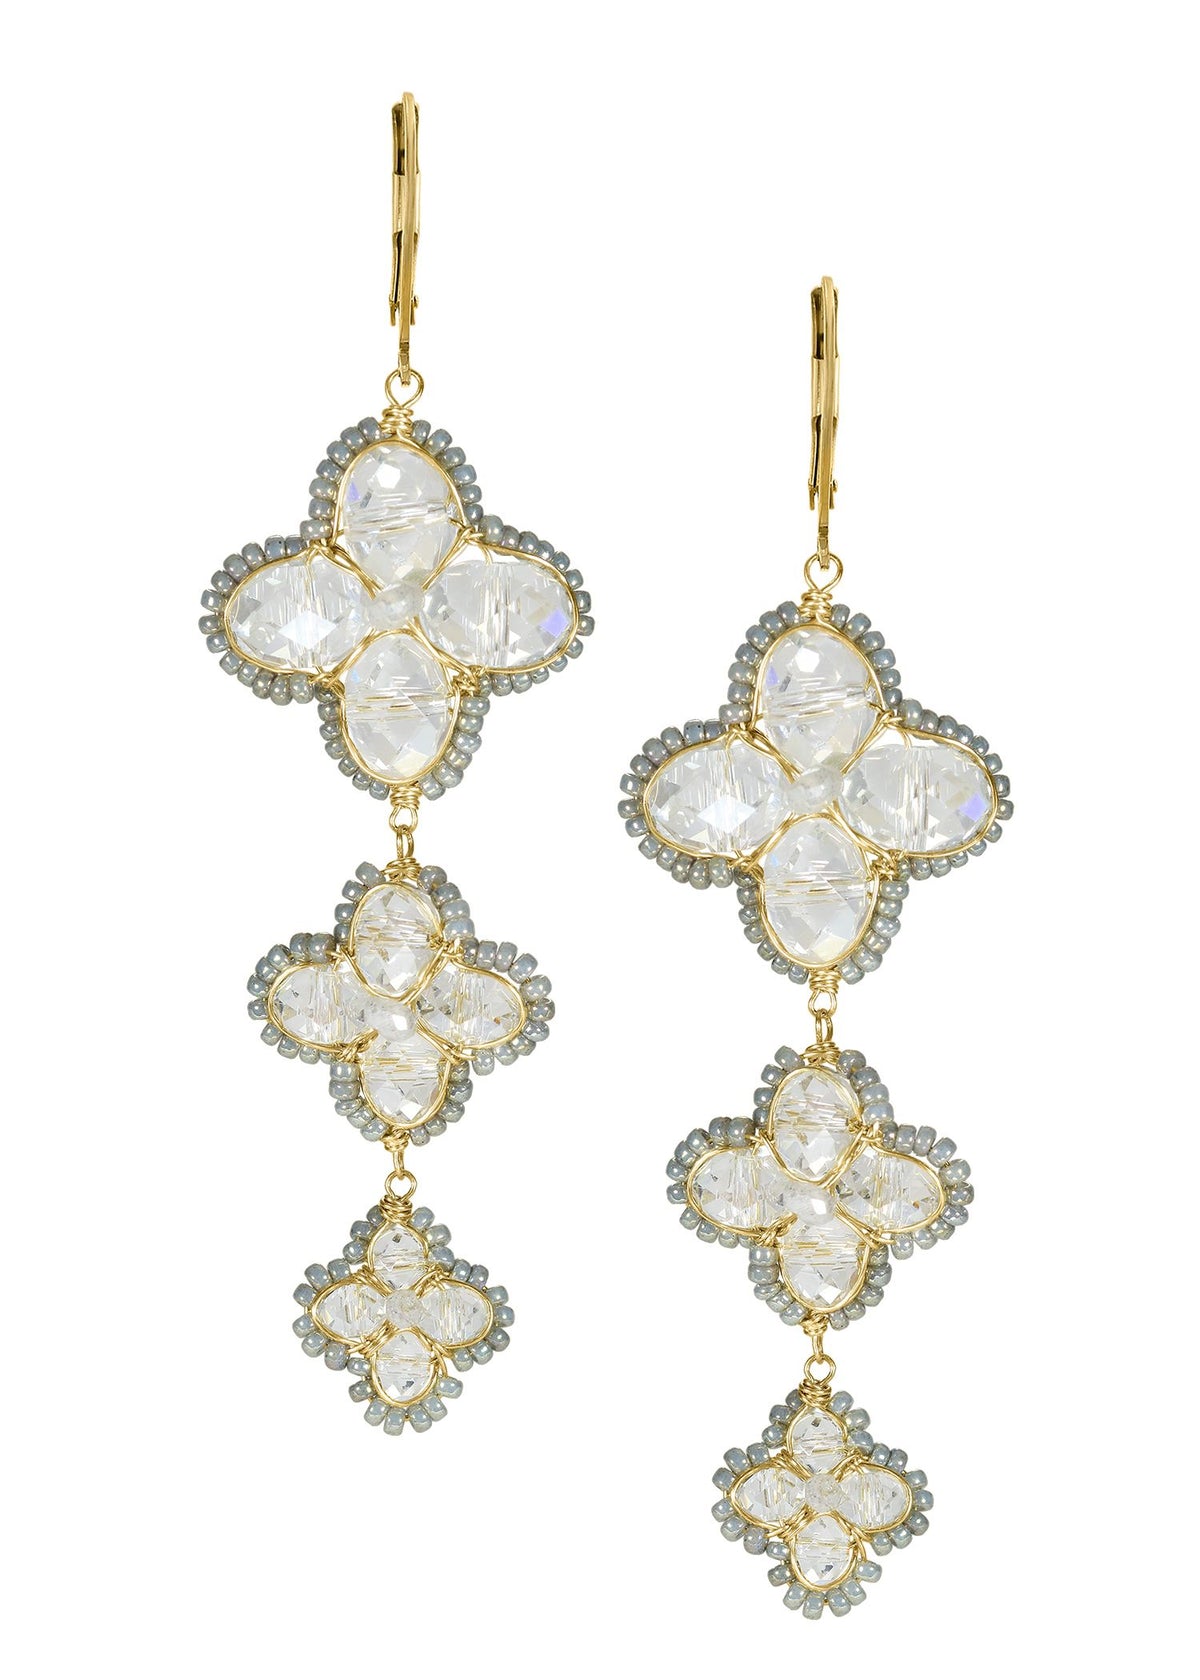 Crystal Moonstone Pearl seed beads 14k gold fill Earrings measure 2-3/4&quot; in length (including the levers) and 13/16&quot; in width Handmade in our Los Angeles studio